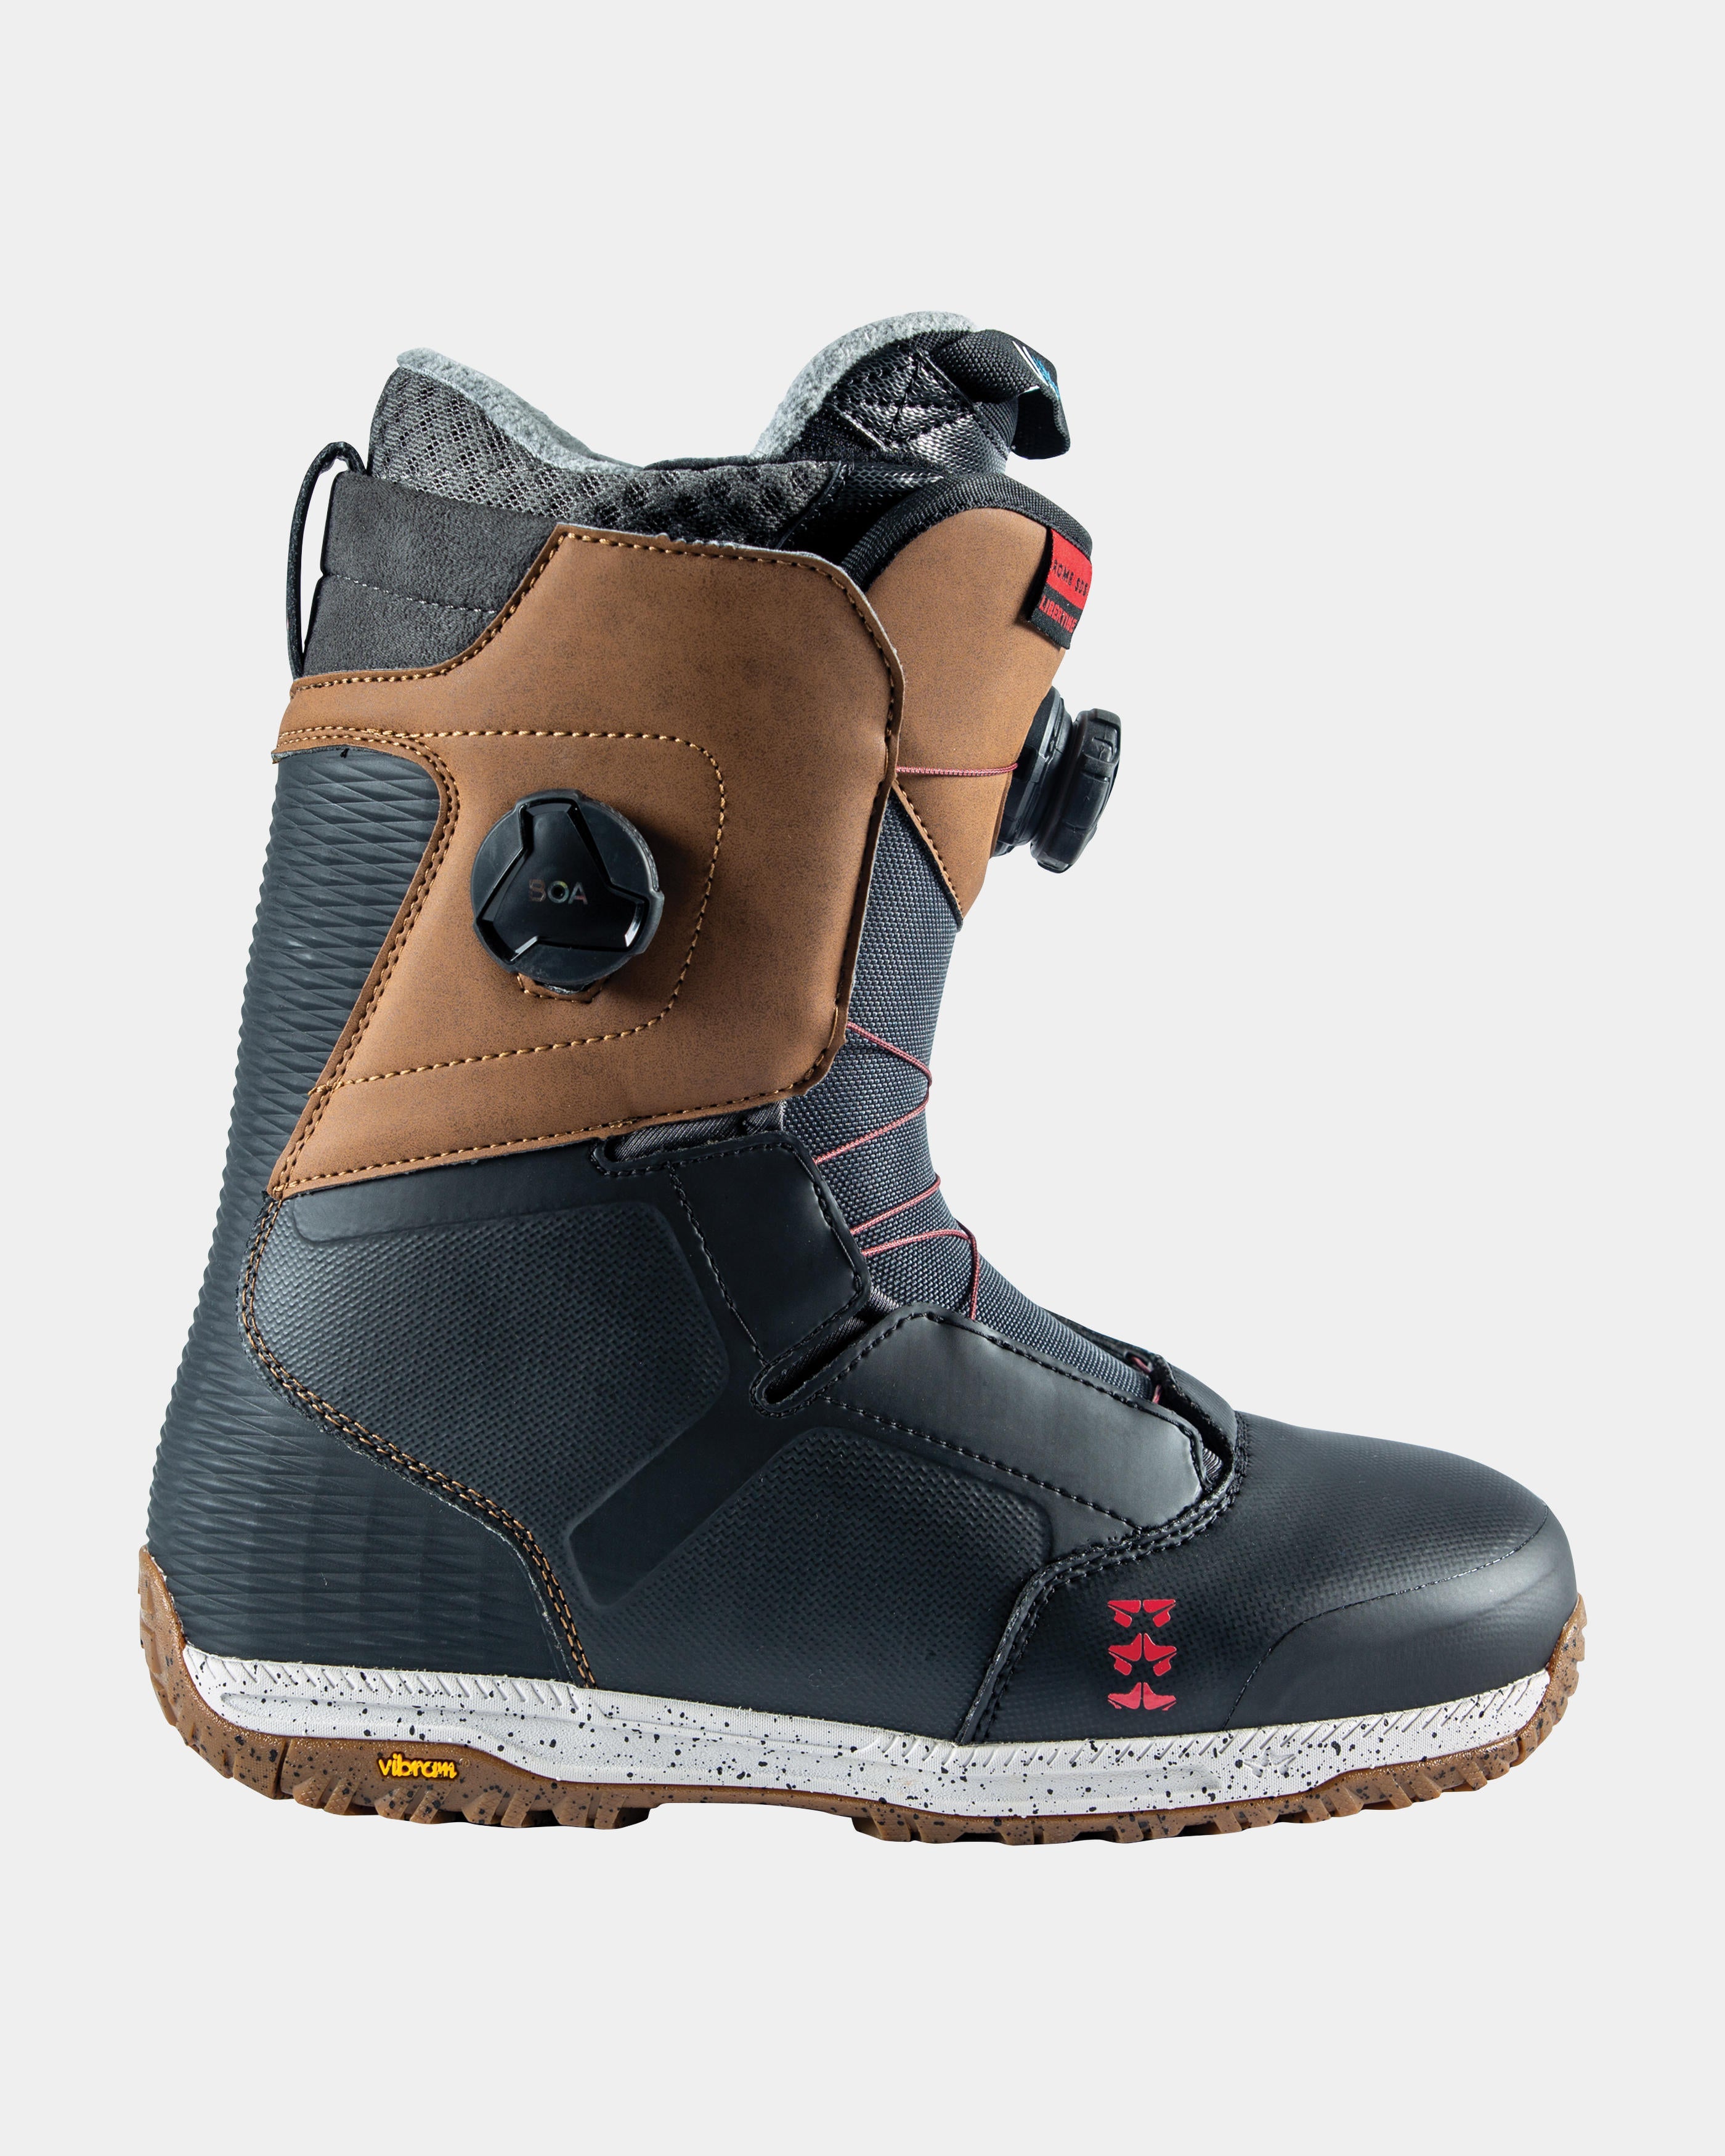 Rome Snowboard Boots – Rome SDS US